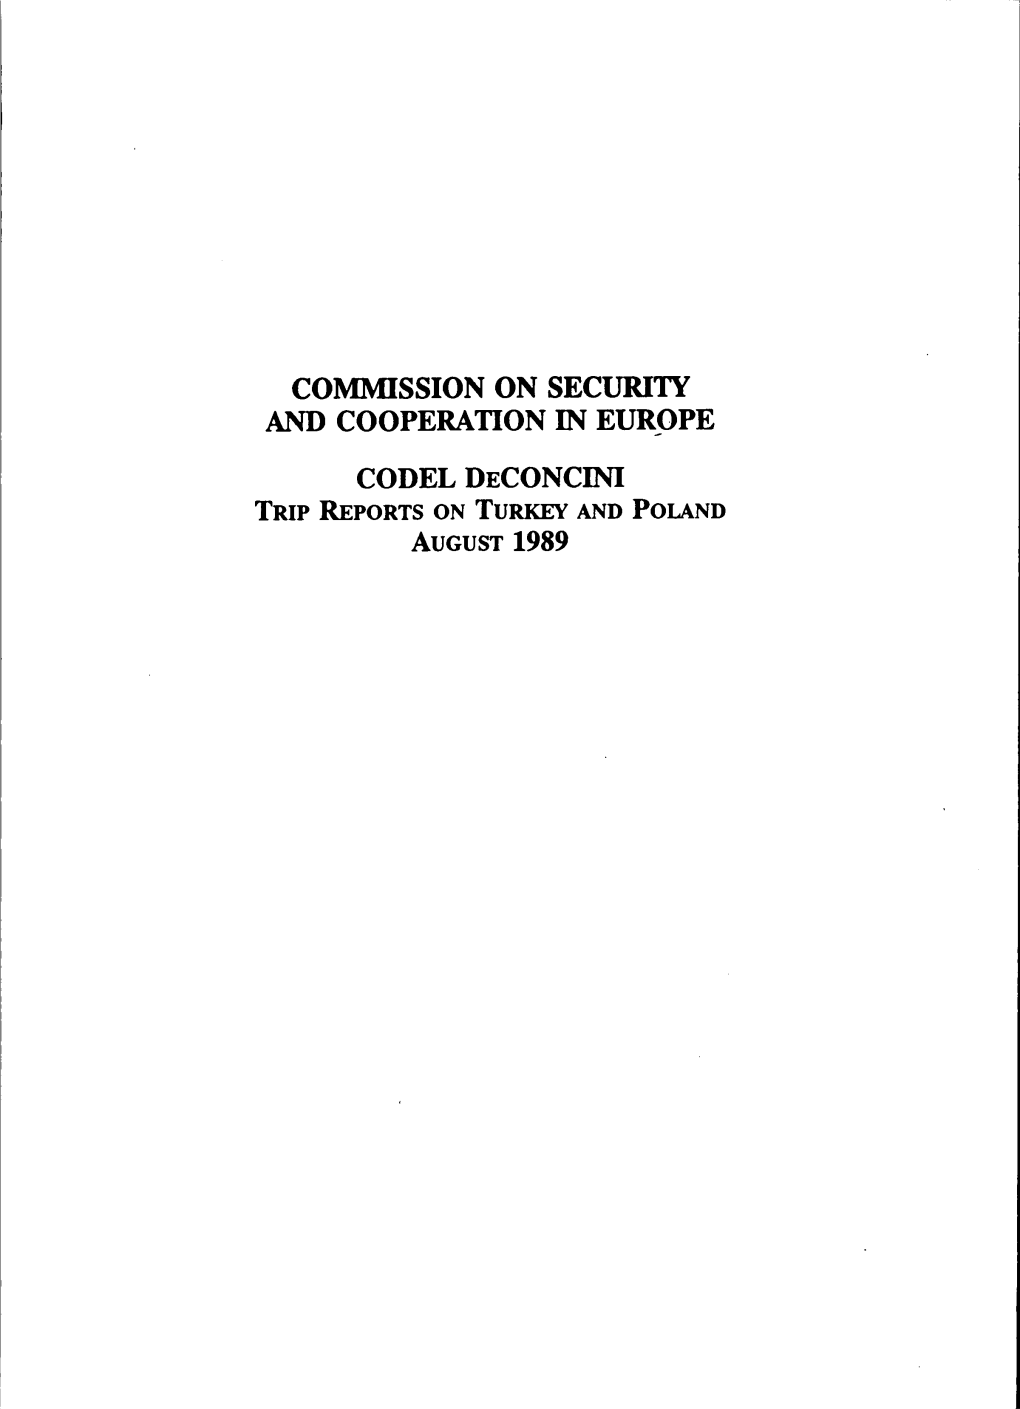 COMMISSION on SECURITY and COOPERATION in EUROPE CODEL DECONCINI TRIP REPORTS on Turkei and POLAND AUGUST 1989 COMMISSION on SECURITY and COOPERATION in EUROPE